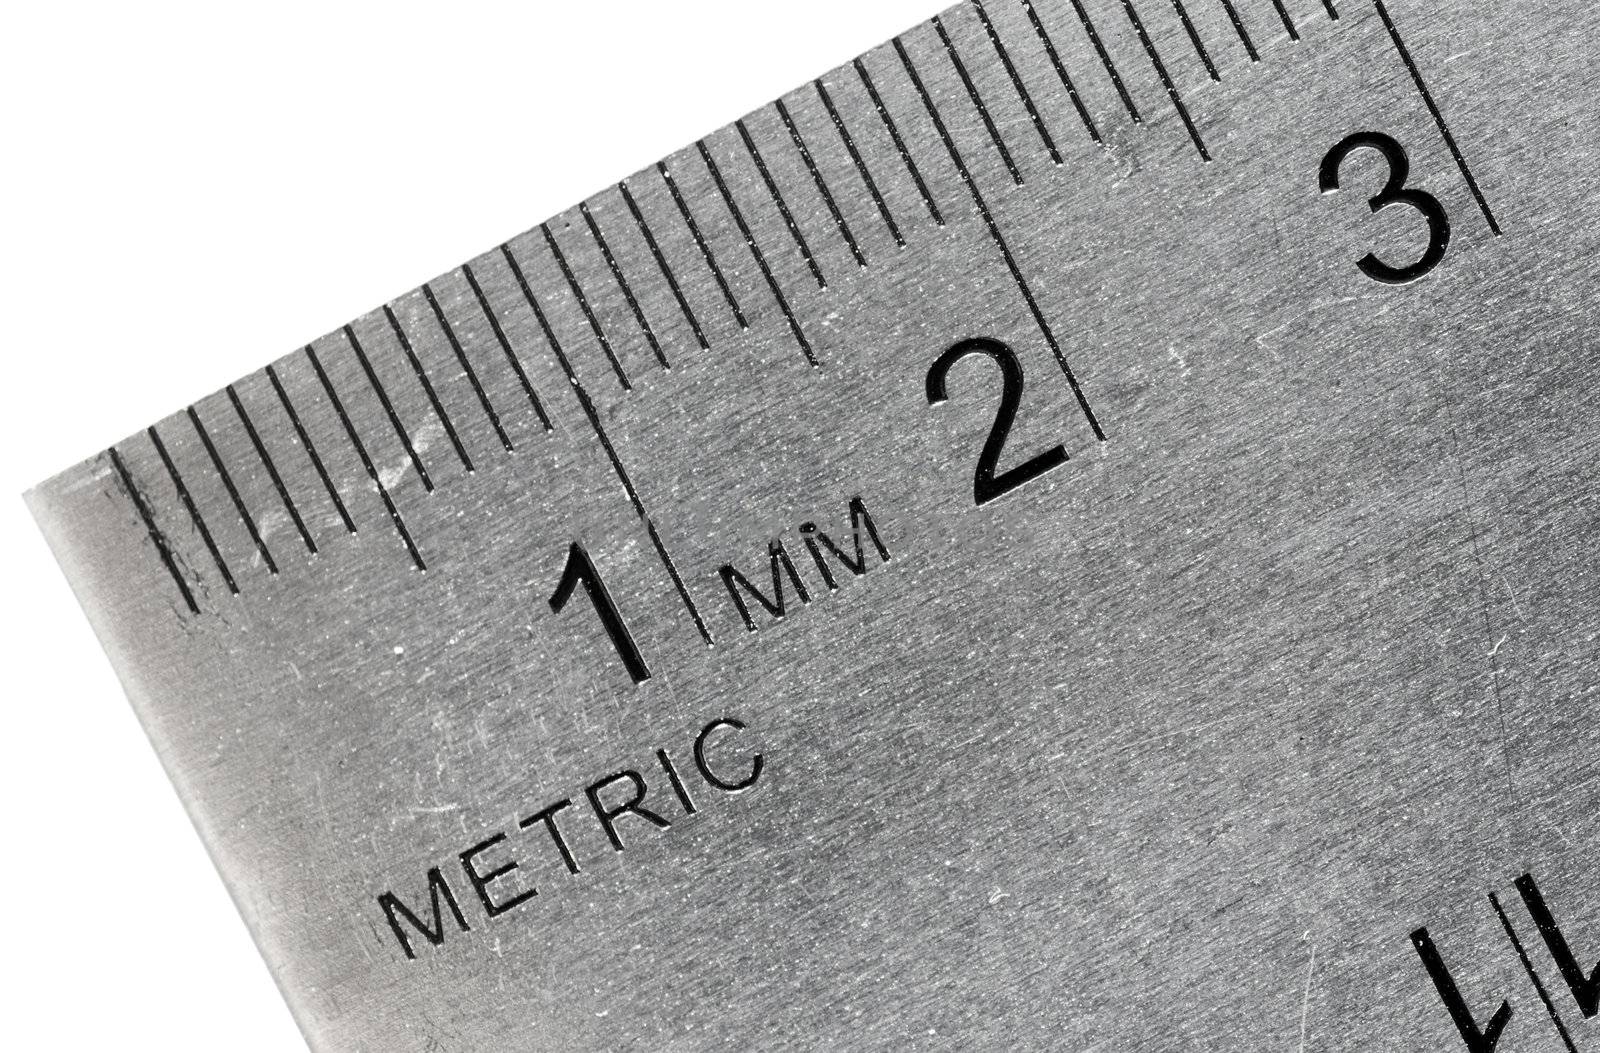 Metric stainless steel ruler by Mirage3